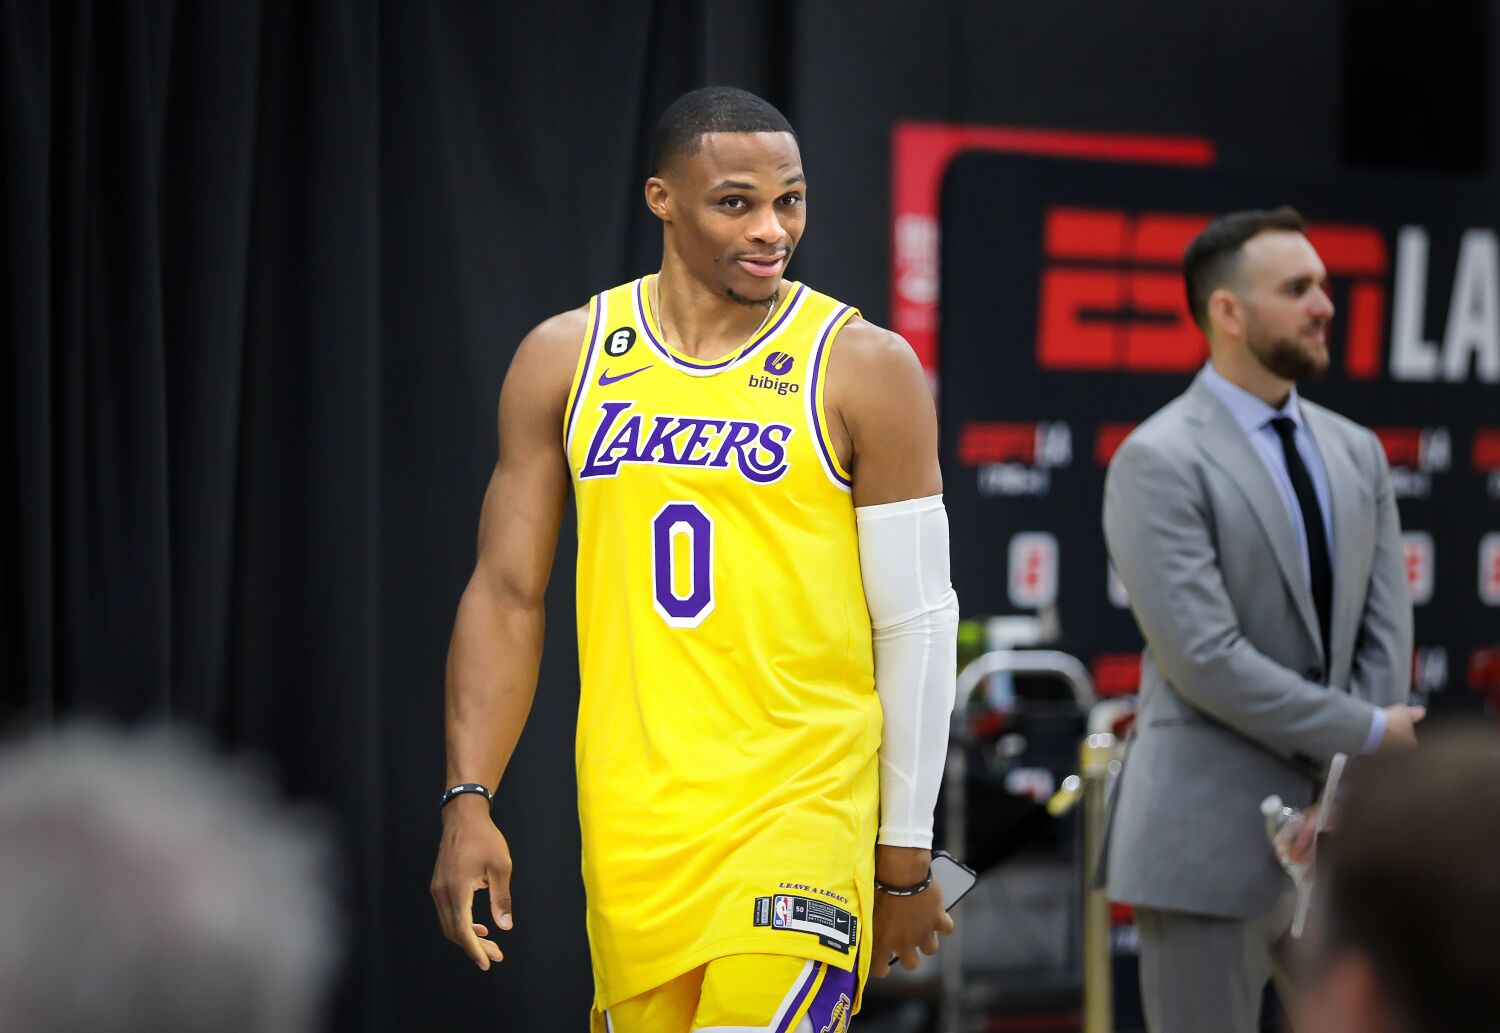 Plaschke: In signing Russell Westbrook, Clippers foolishly mirror the Lakers' mistake